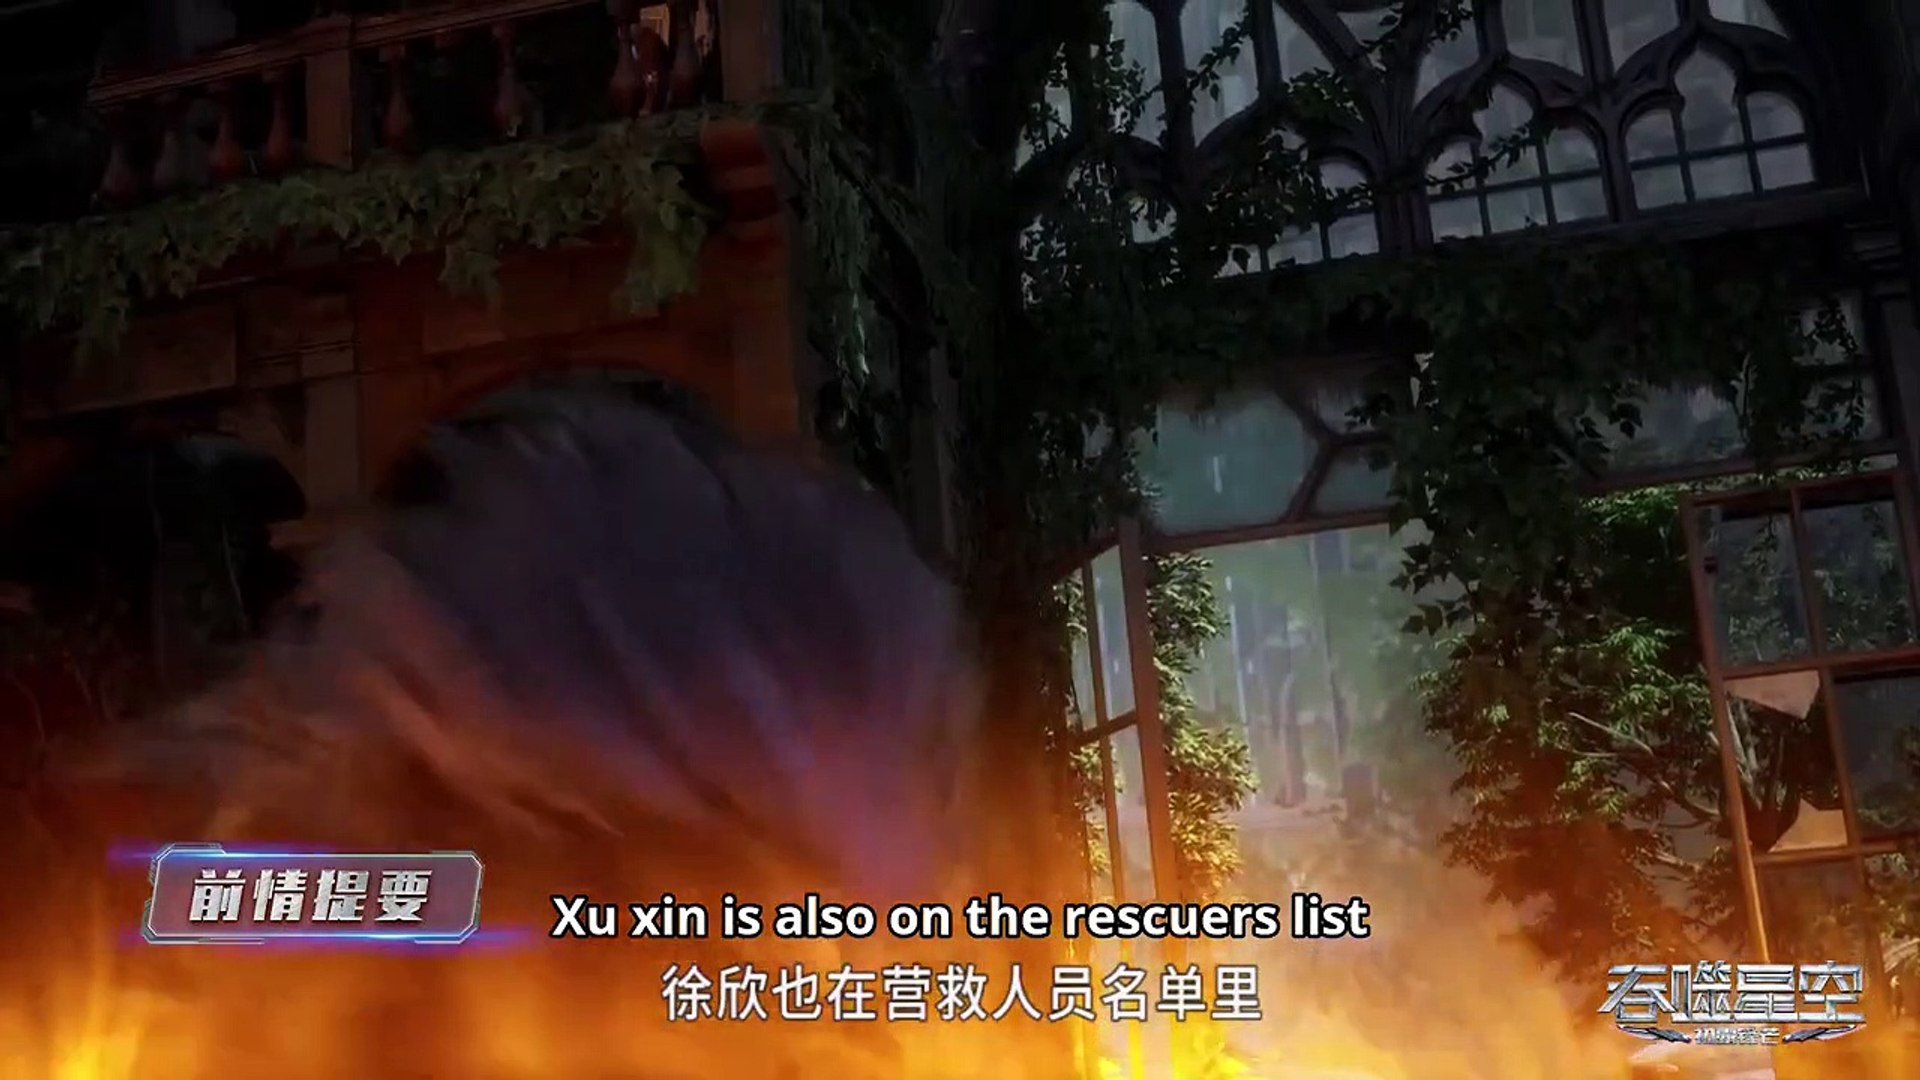 Blades of the Guardians Episode 9 English Subtitle - video Dailymotion